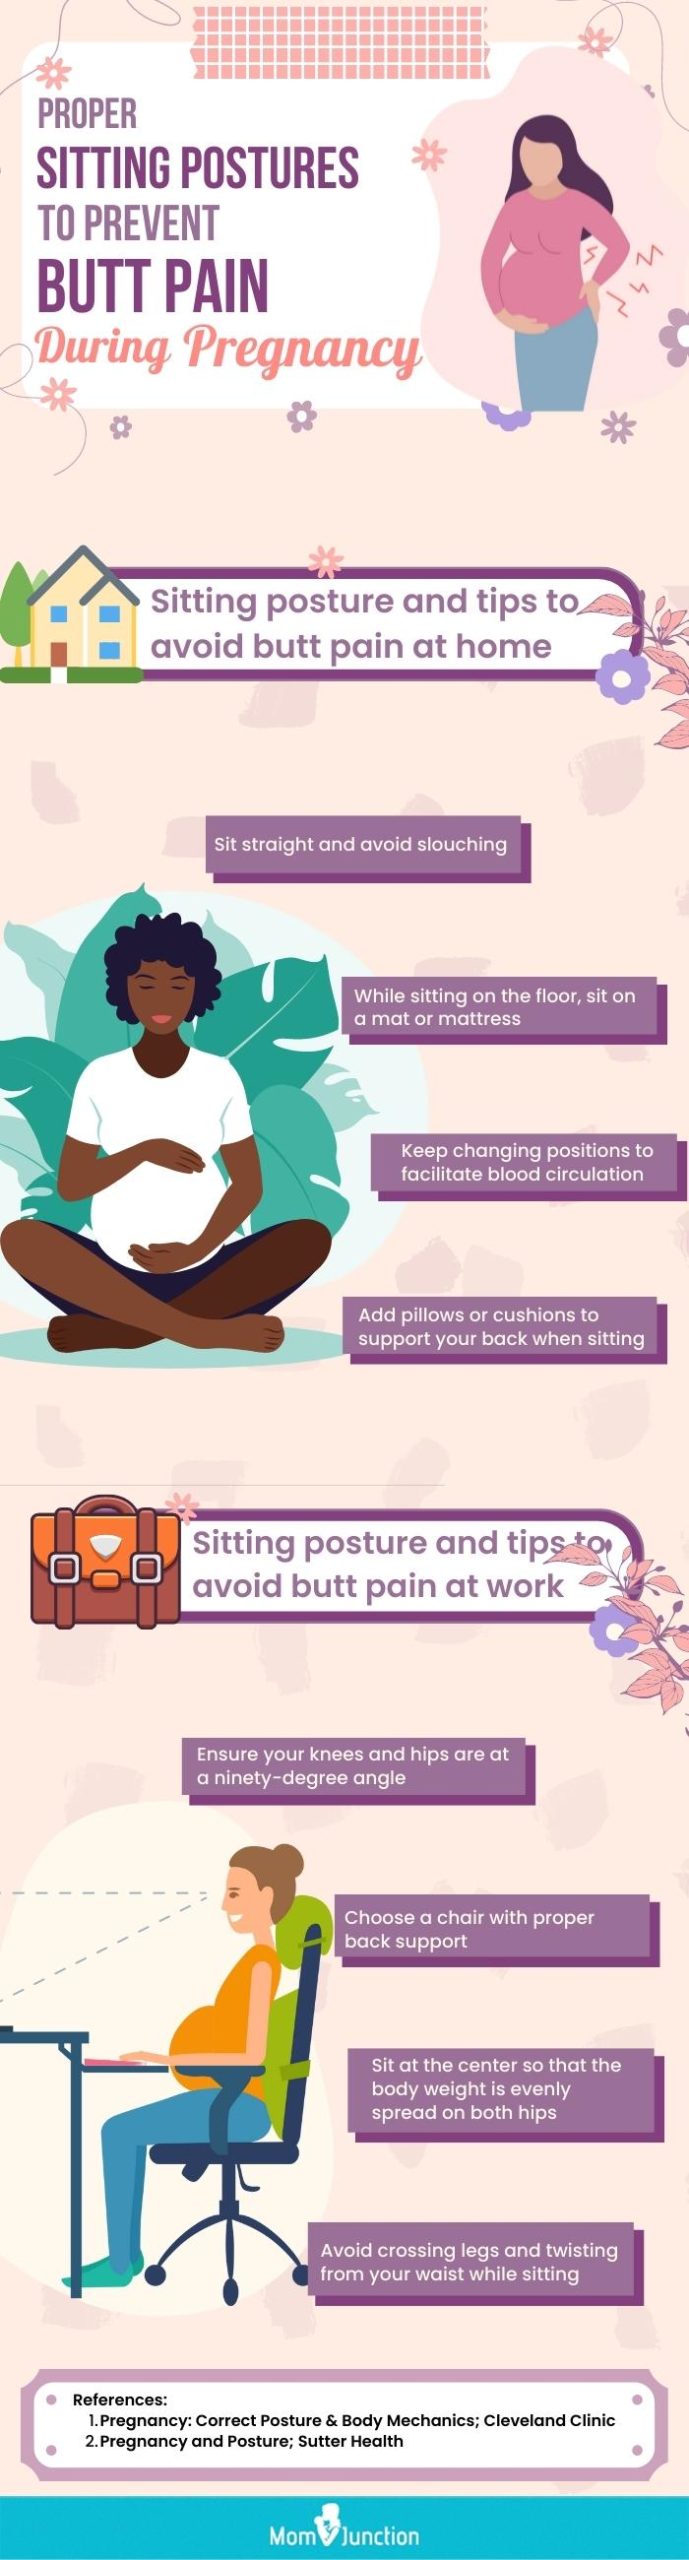 https://www.momjunction.com/wp-content/uploads/2021/12/Proper-Sitting-Postures-To-Prevent-Butt-Pain-During-Pregnancy-Row-1279-new-sheet-2-0-scaled.jpg